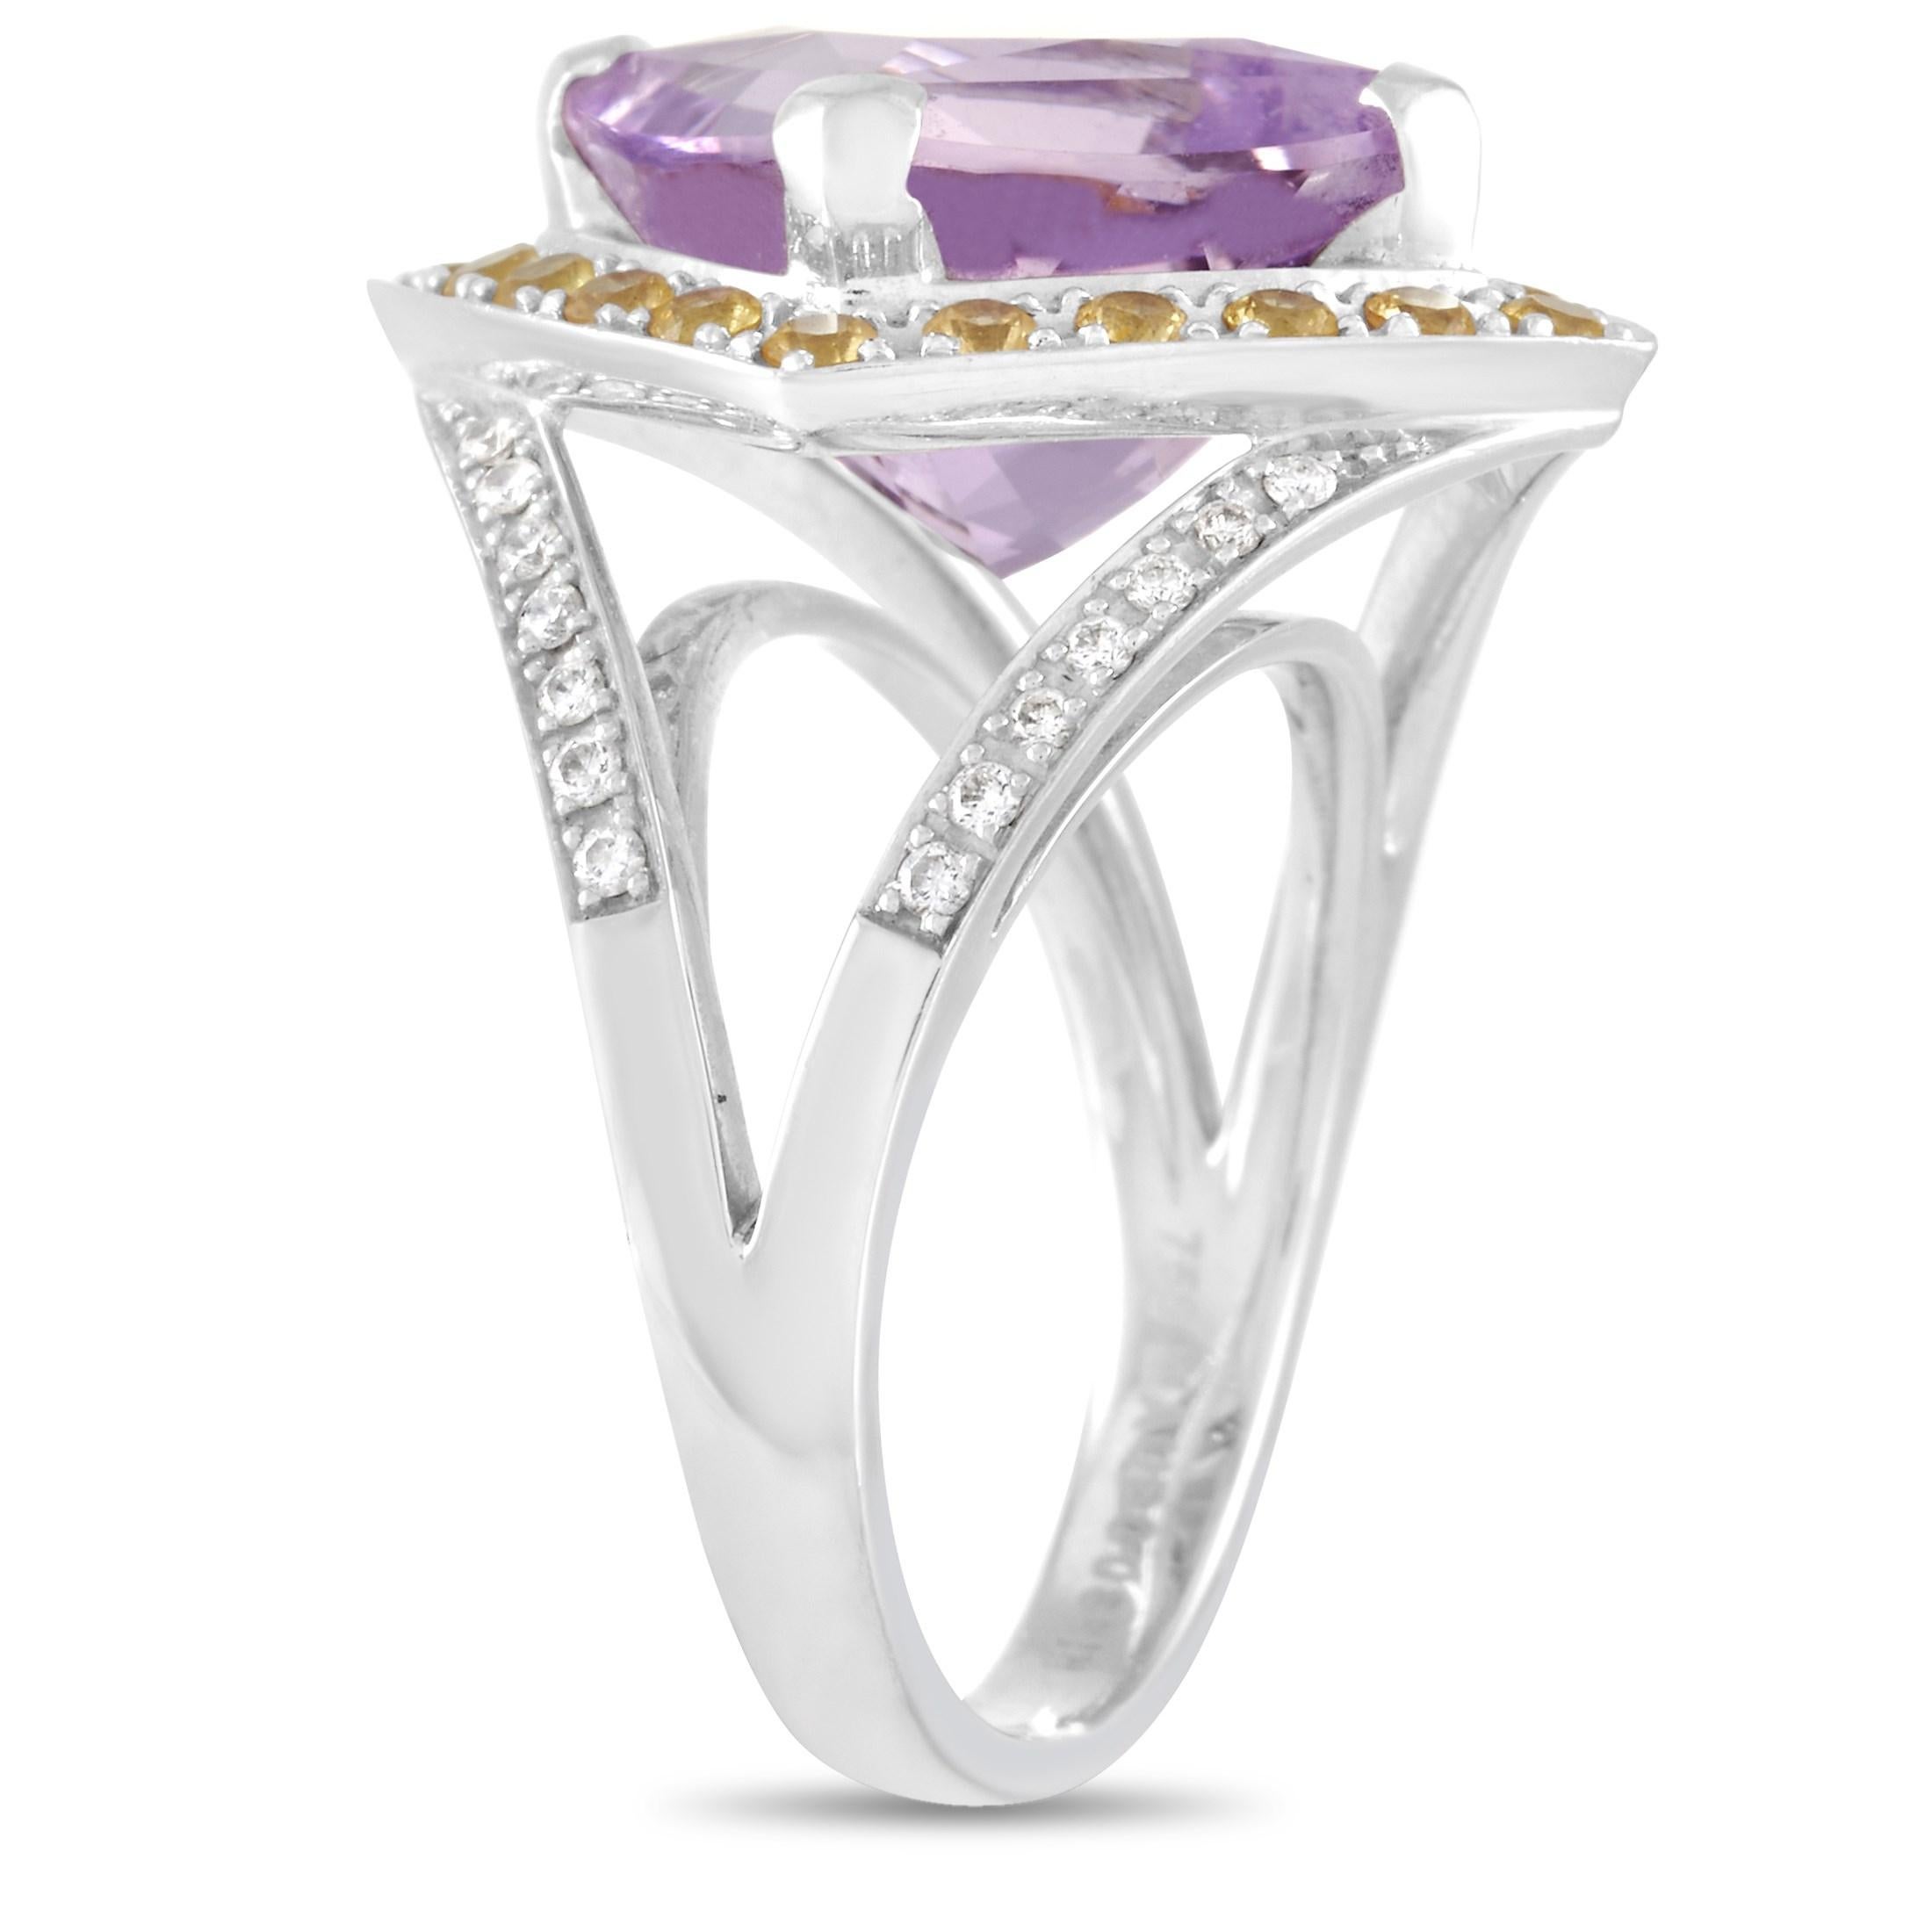 This Mauboussin 18K White Gold Amethyst, Citrine, and Diamond Ring is a stunning piece that oozes glamour and style. The band is made with 18K white gold and set with numerous round cut diamonds. At the center of the ring, round cut citrines for a